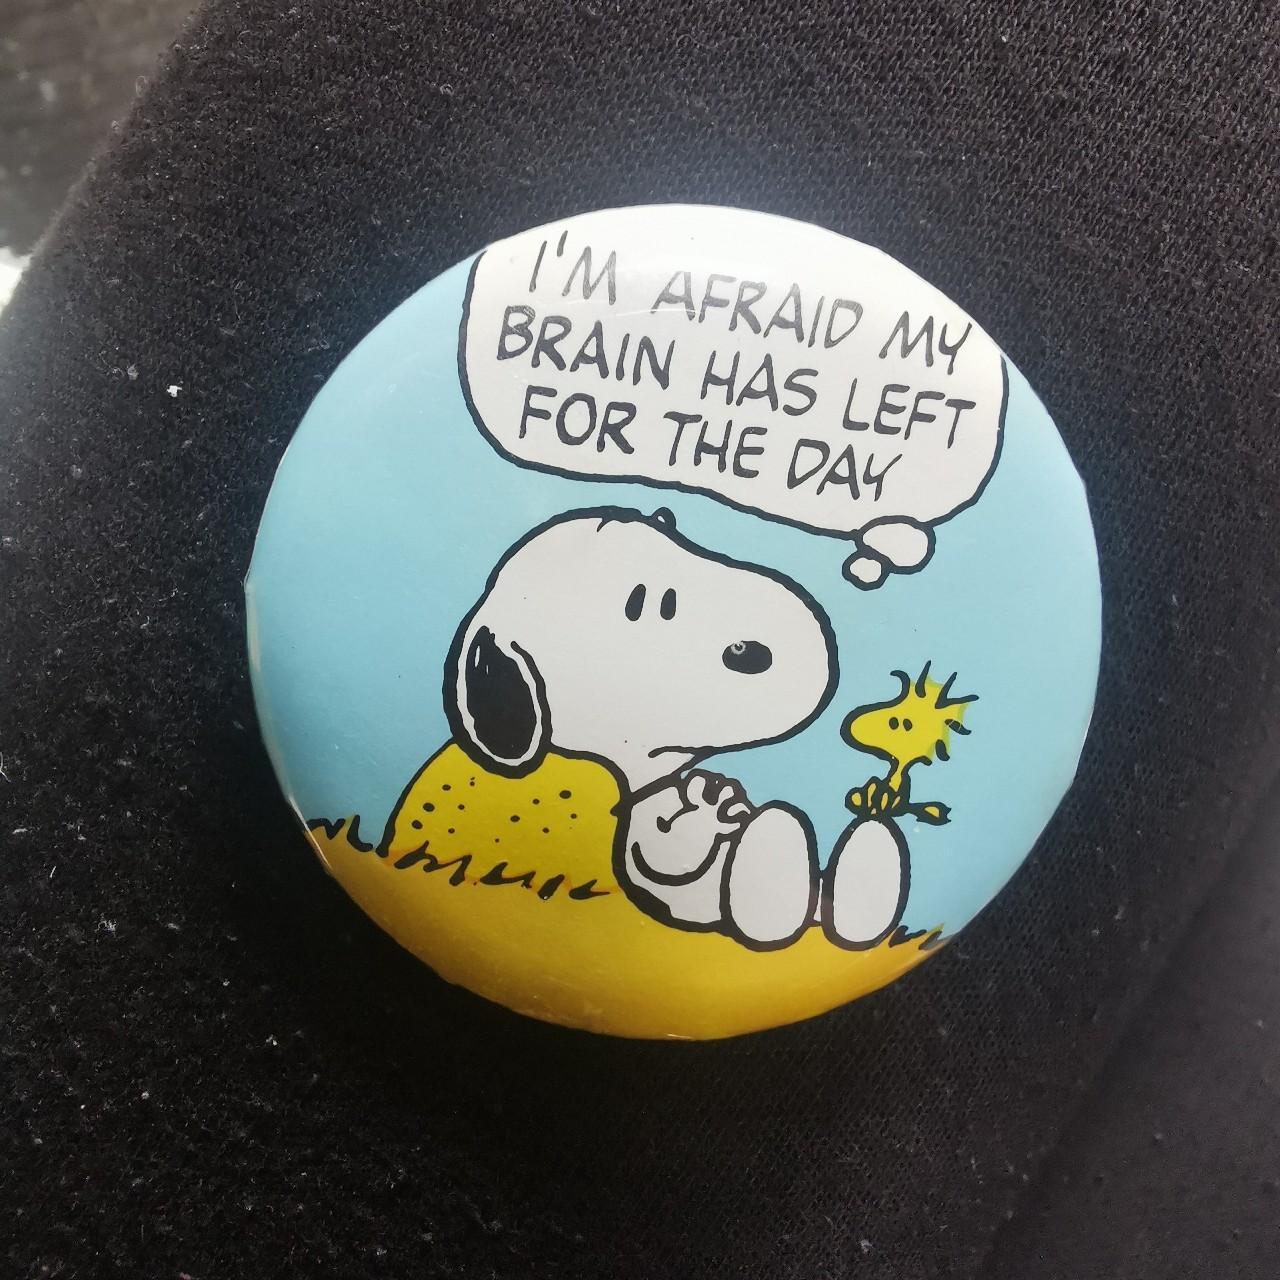 Vintage 60s badge featuring Woodstock and snoopy...